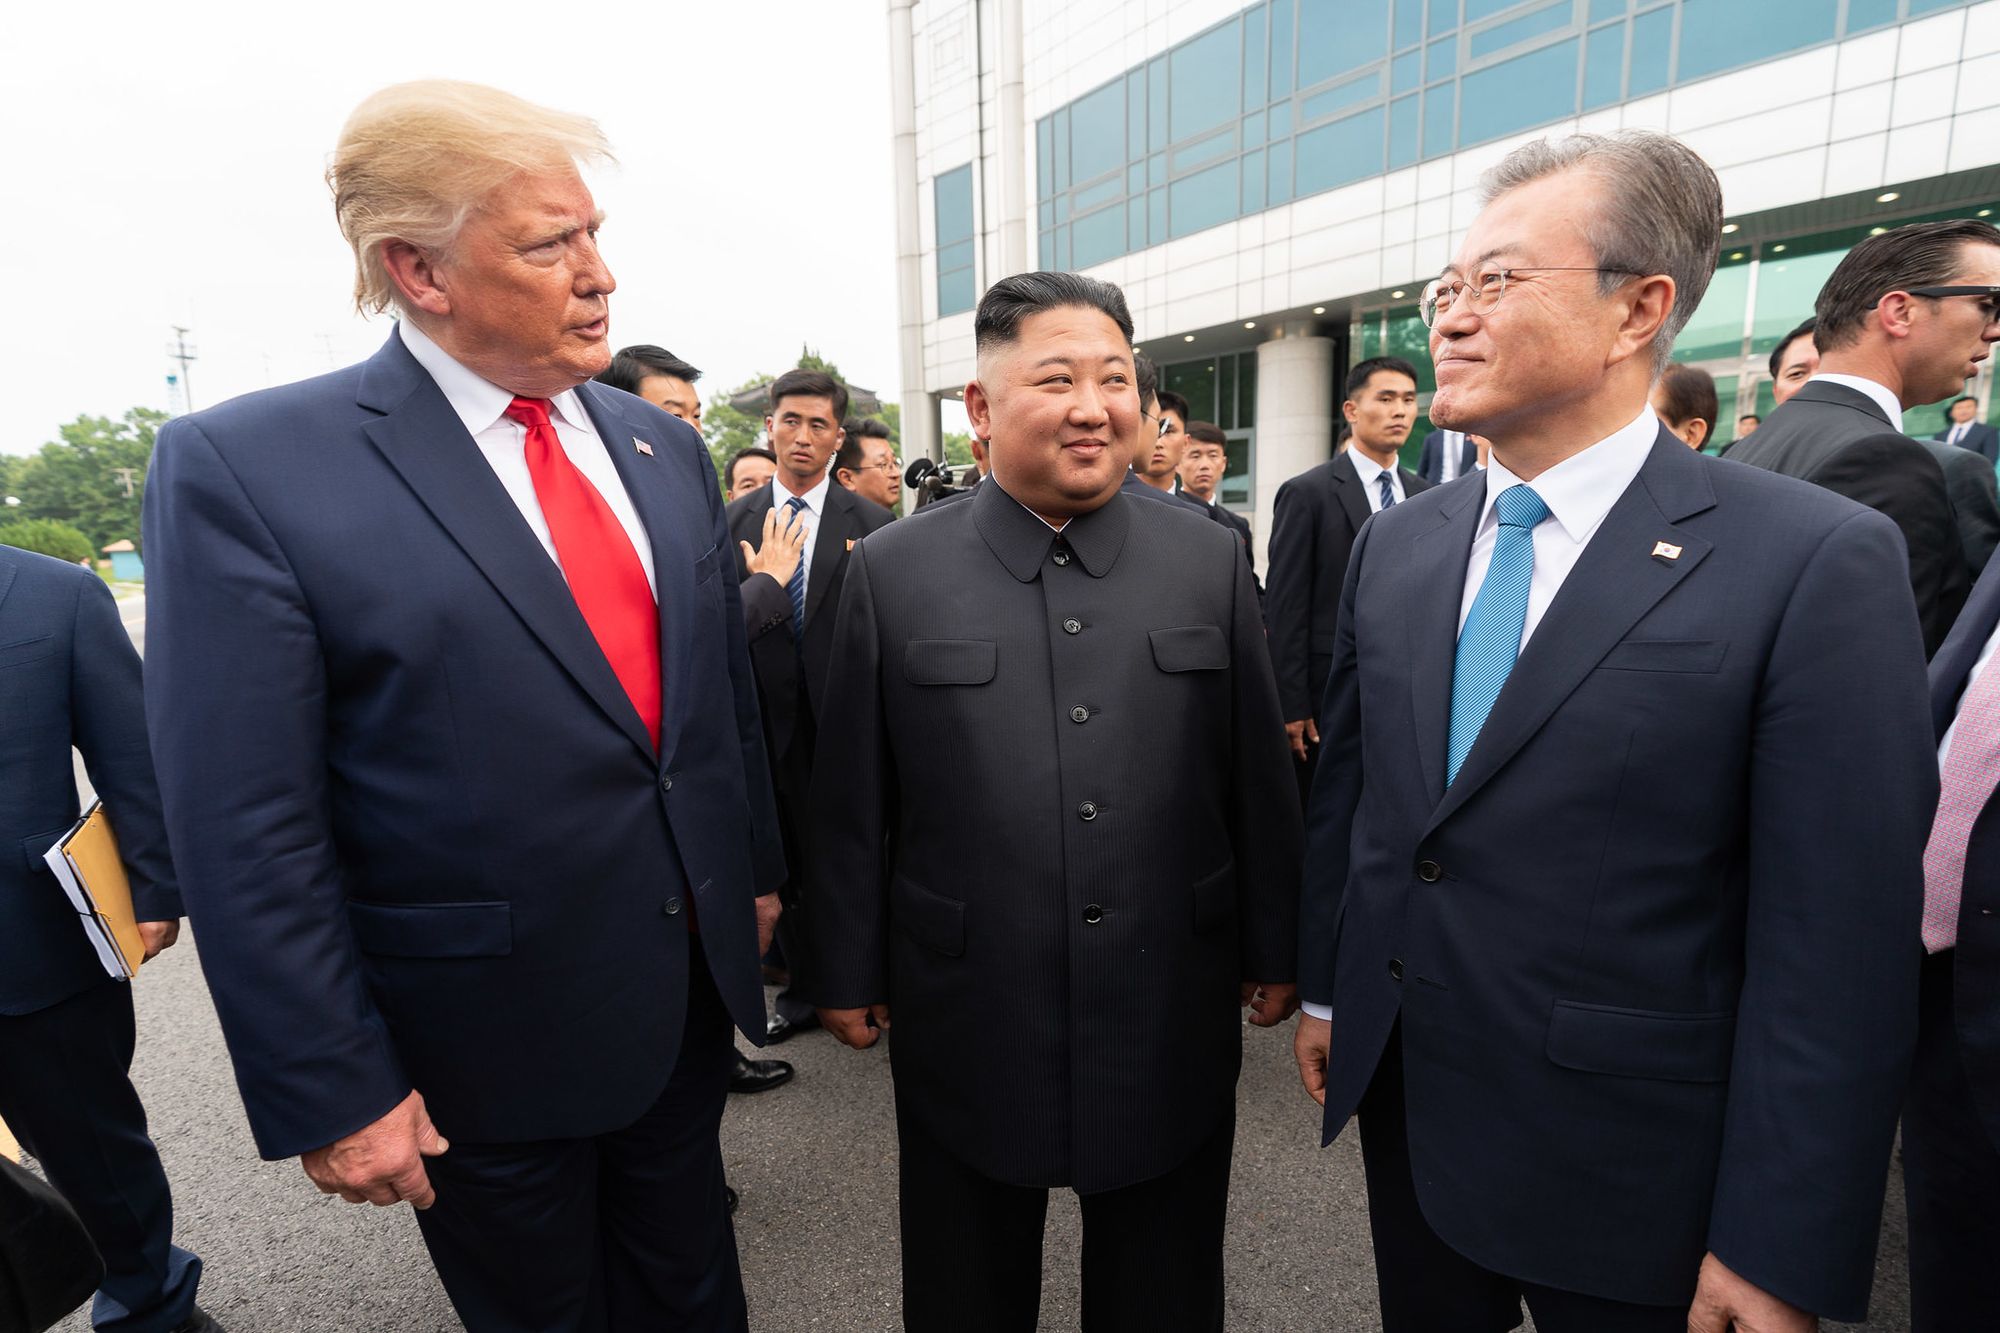 President Trump Meets with Chairman Kim Jong Un, The White House, Flickr